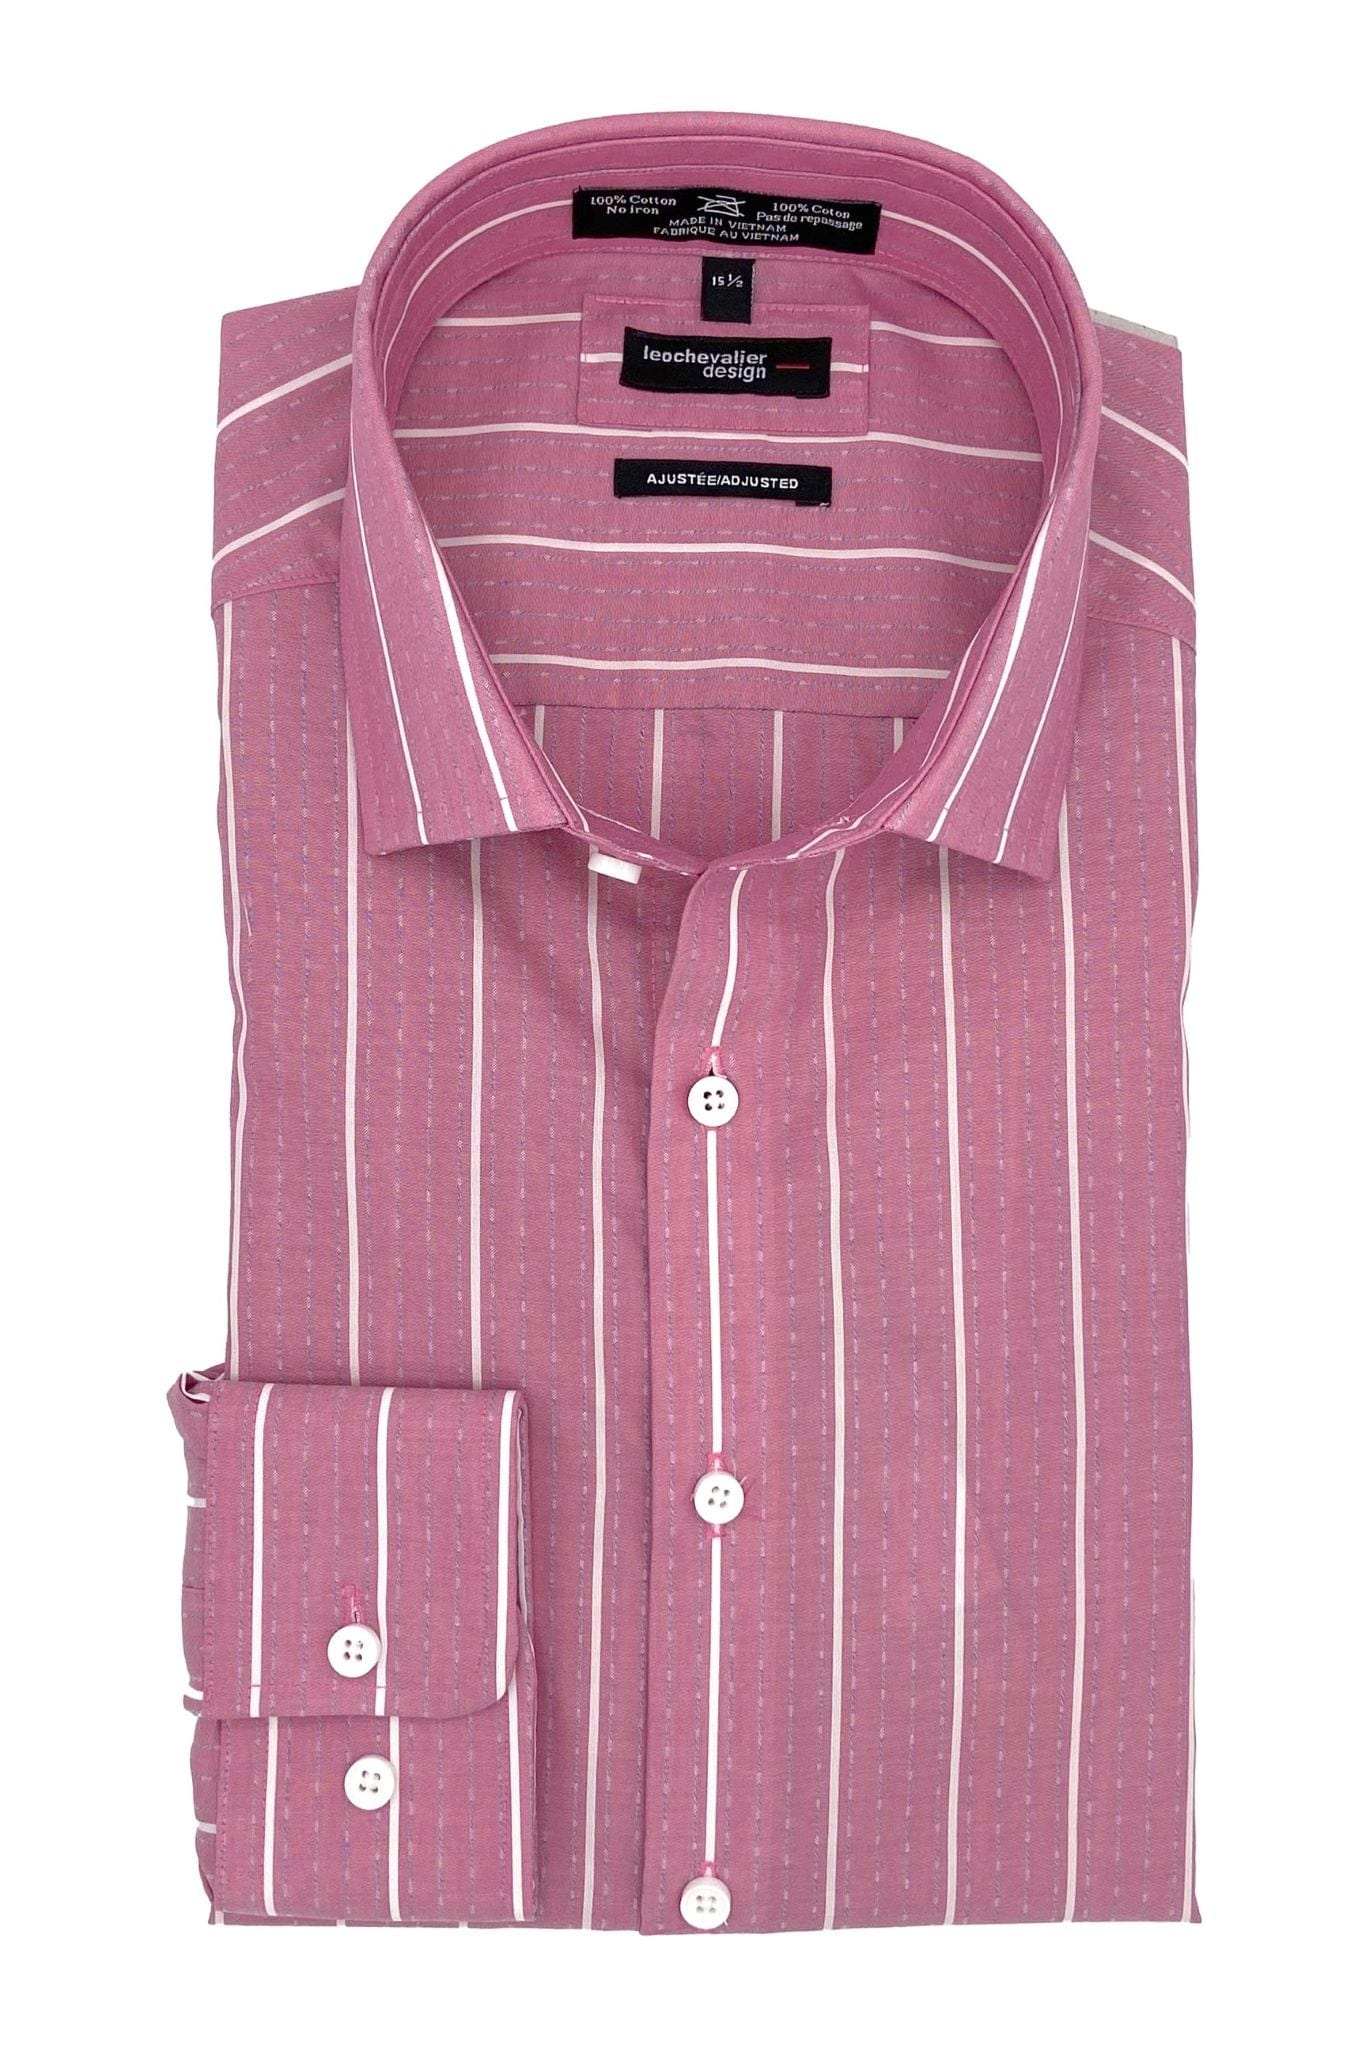 Leo Chevalier Design Classic Red Striped Men's Slim-Fit Business Shirts